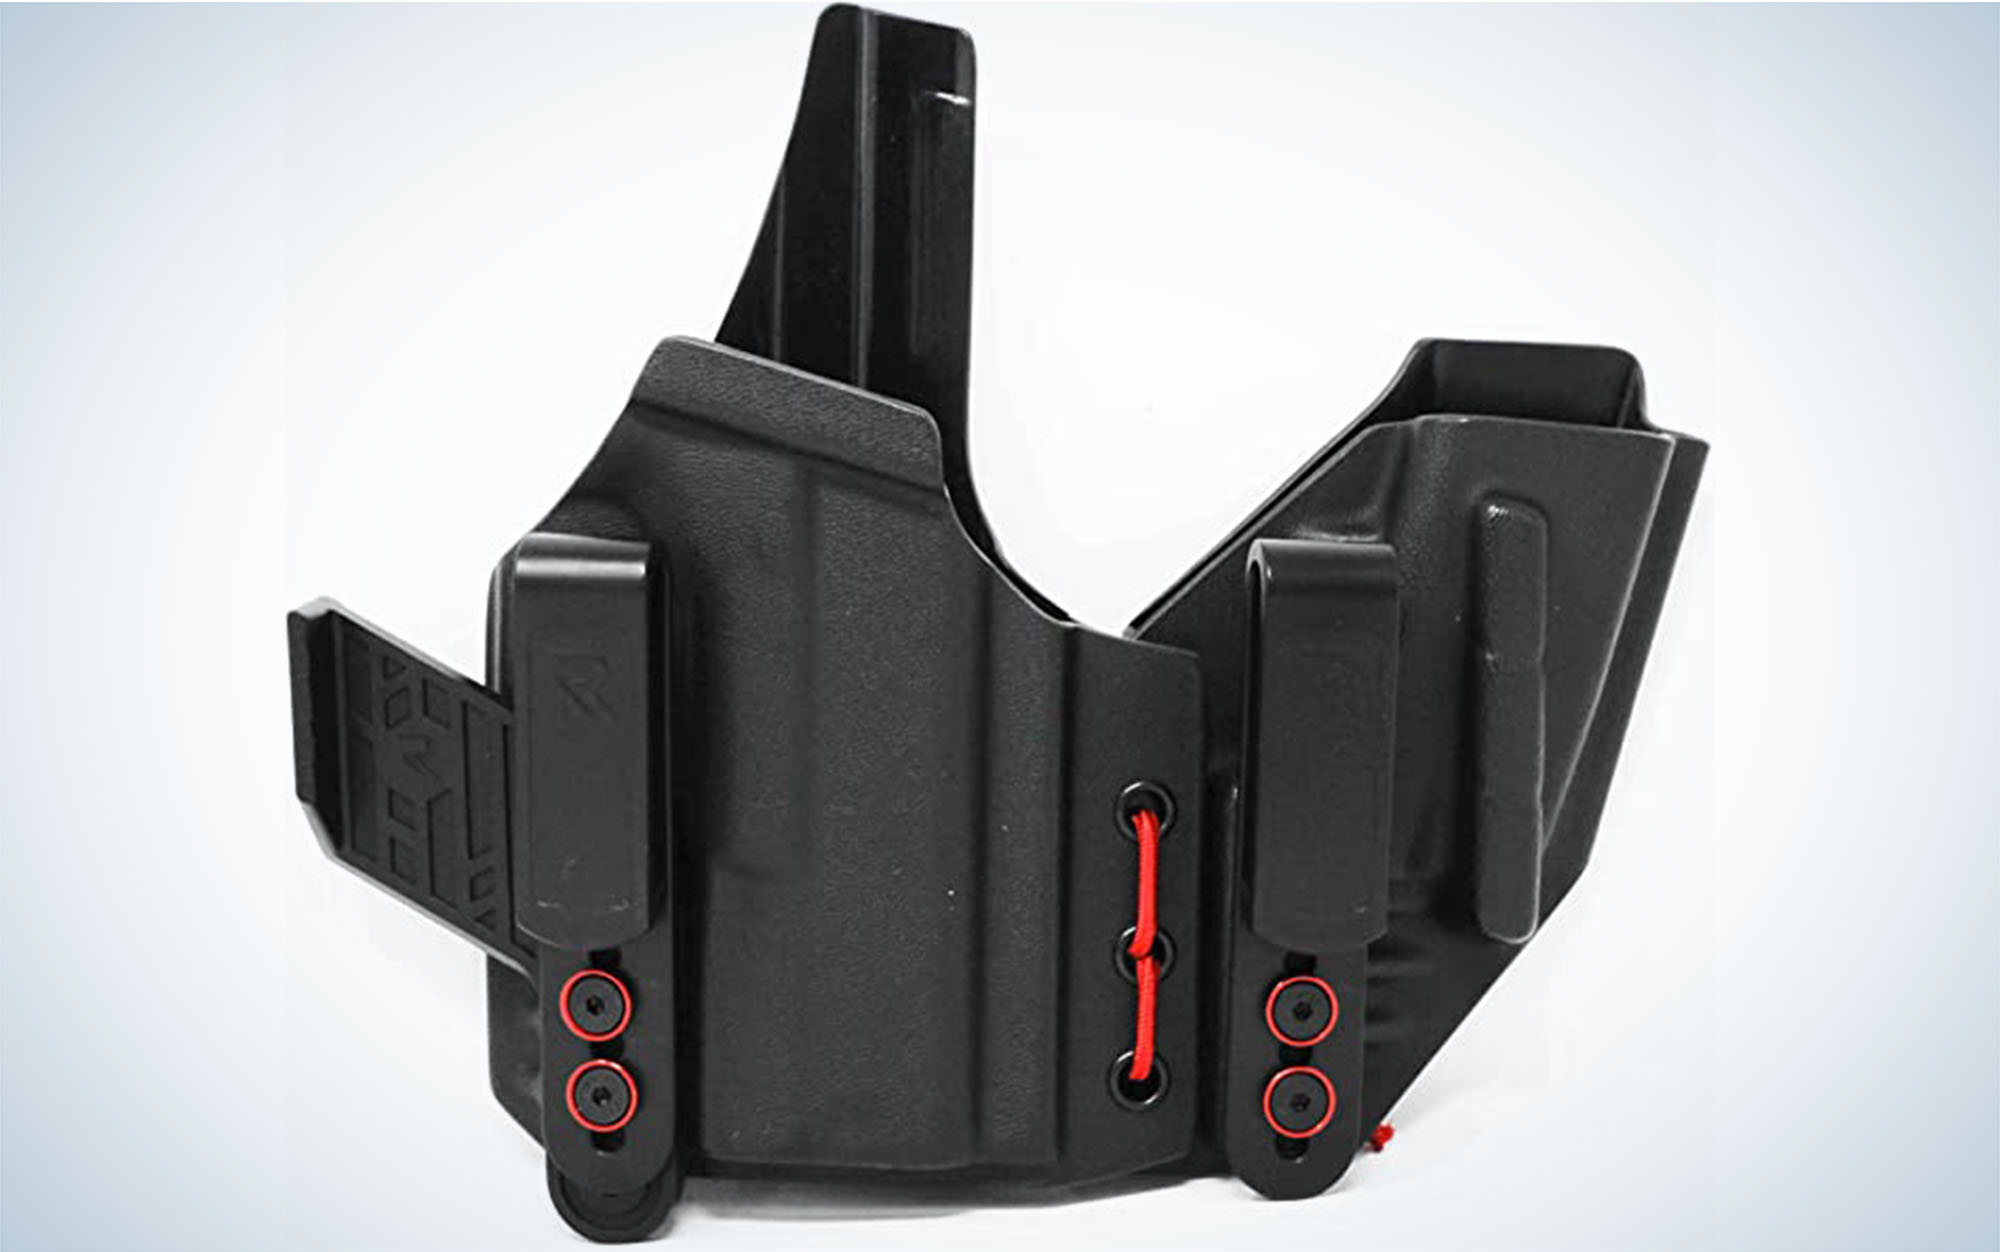 The Radial Innovations Coreflex AIWB Holster is one of the best holsters.